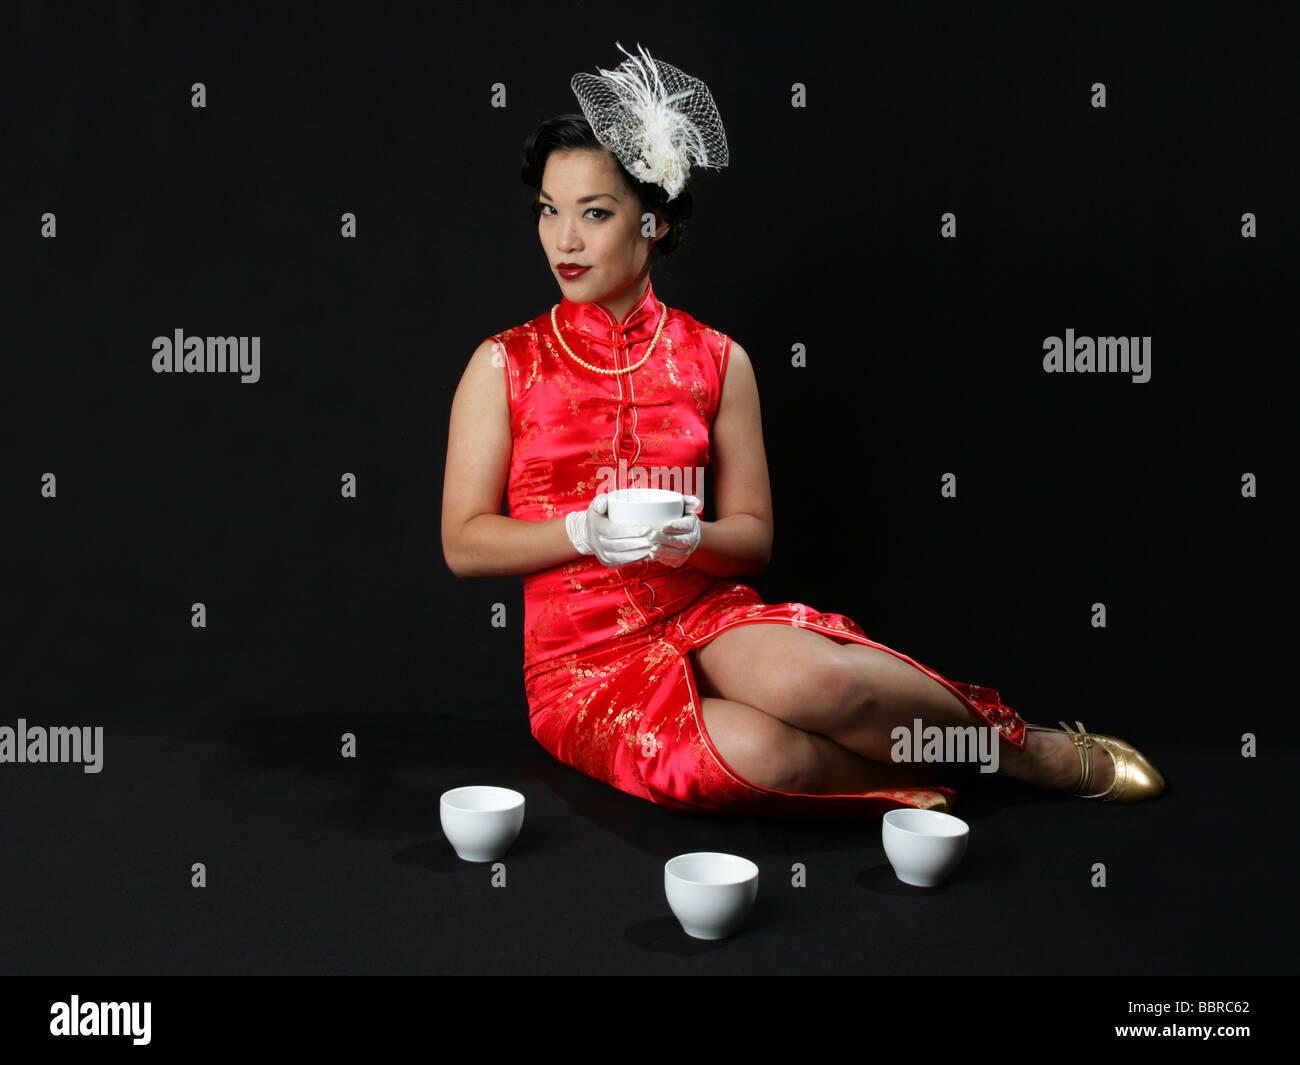 Pinup Portrait of Burlesque Performer Marianne Cheesecake in a Long Chinese Dress with White Hat and Gloves Holding a Teacup Stock Photo